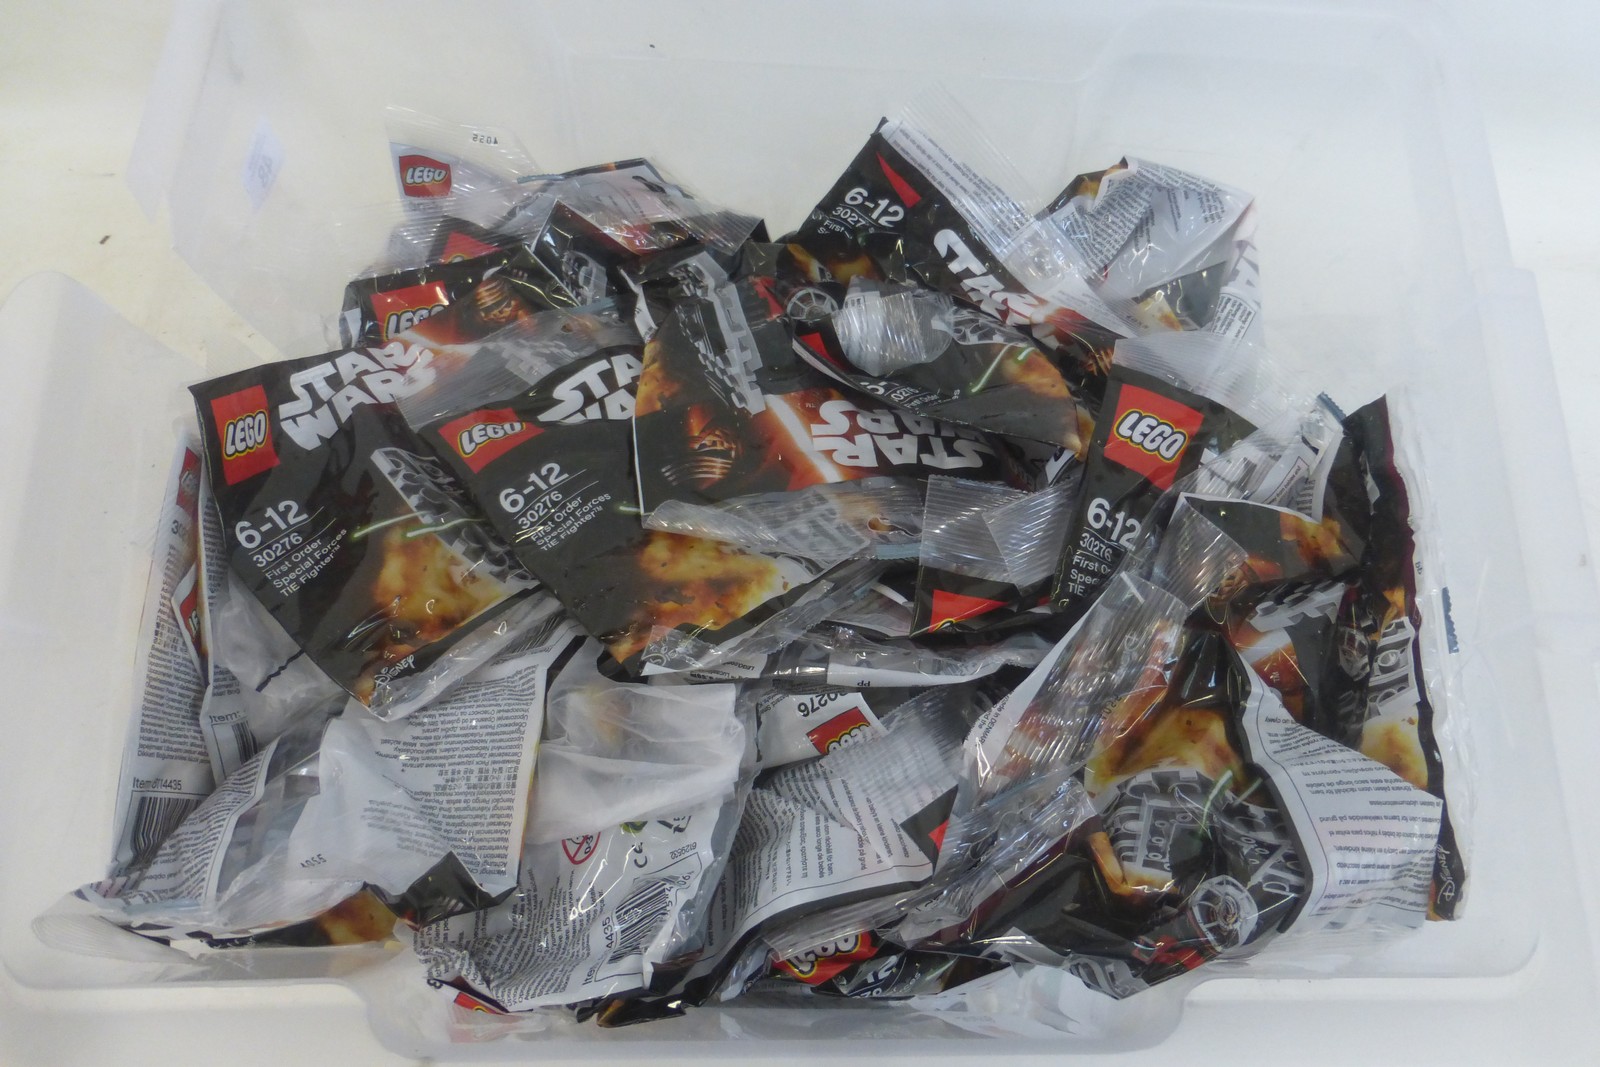 A box of Lego Star Wars packets.